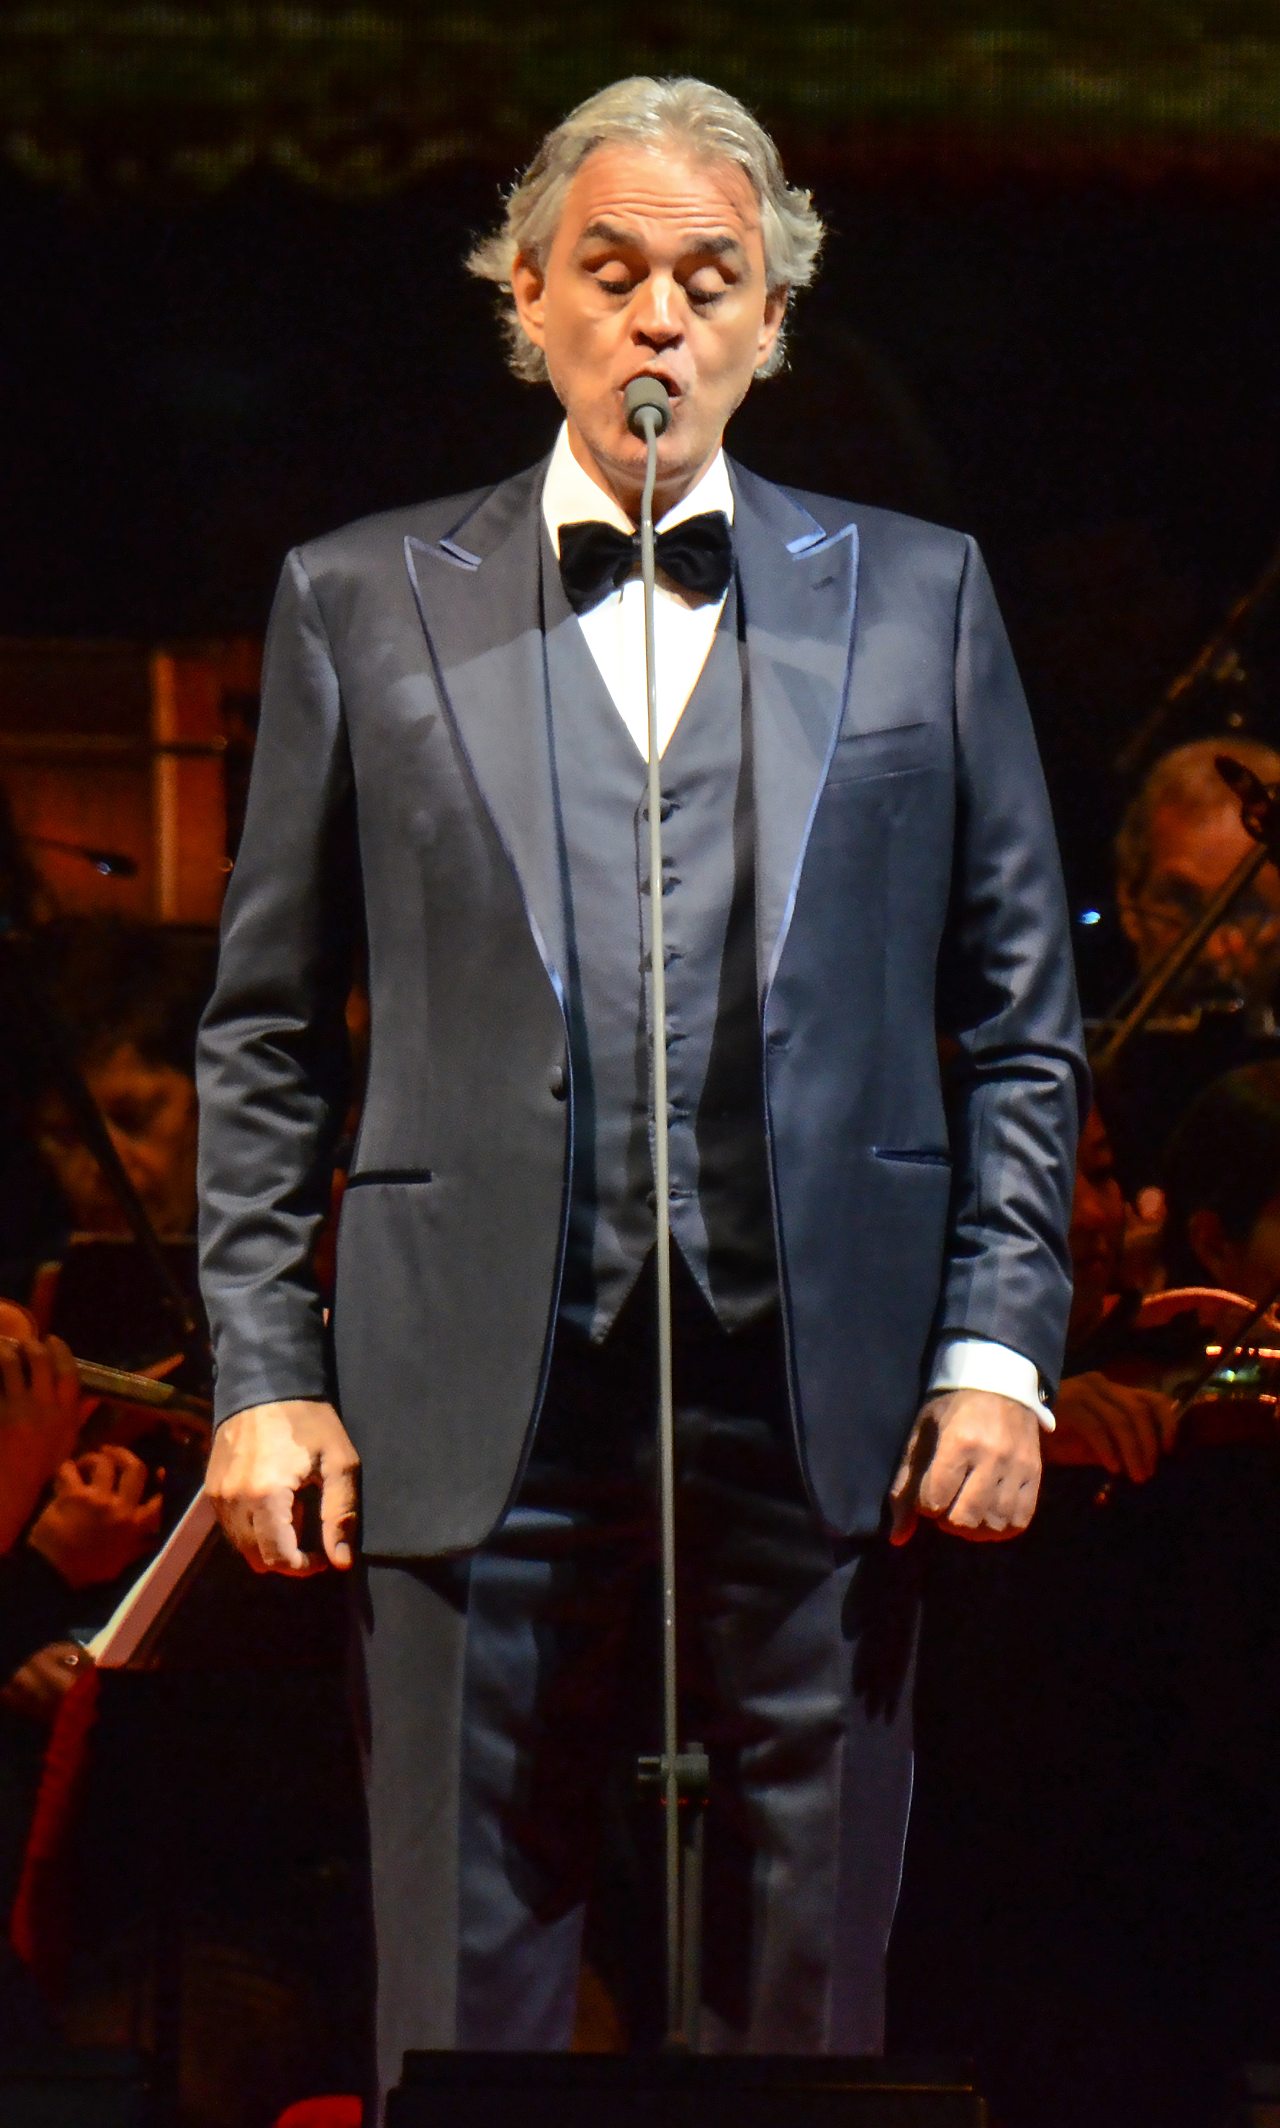 Andrea Bocelli plays Amalie Arena in Tampa, Florida on February 14, 2018.